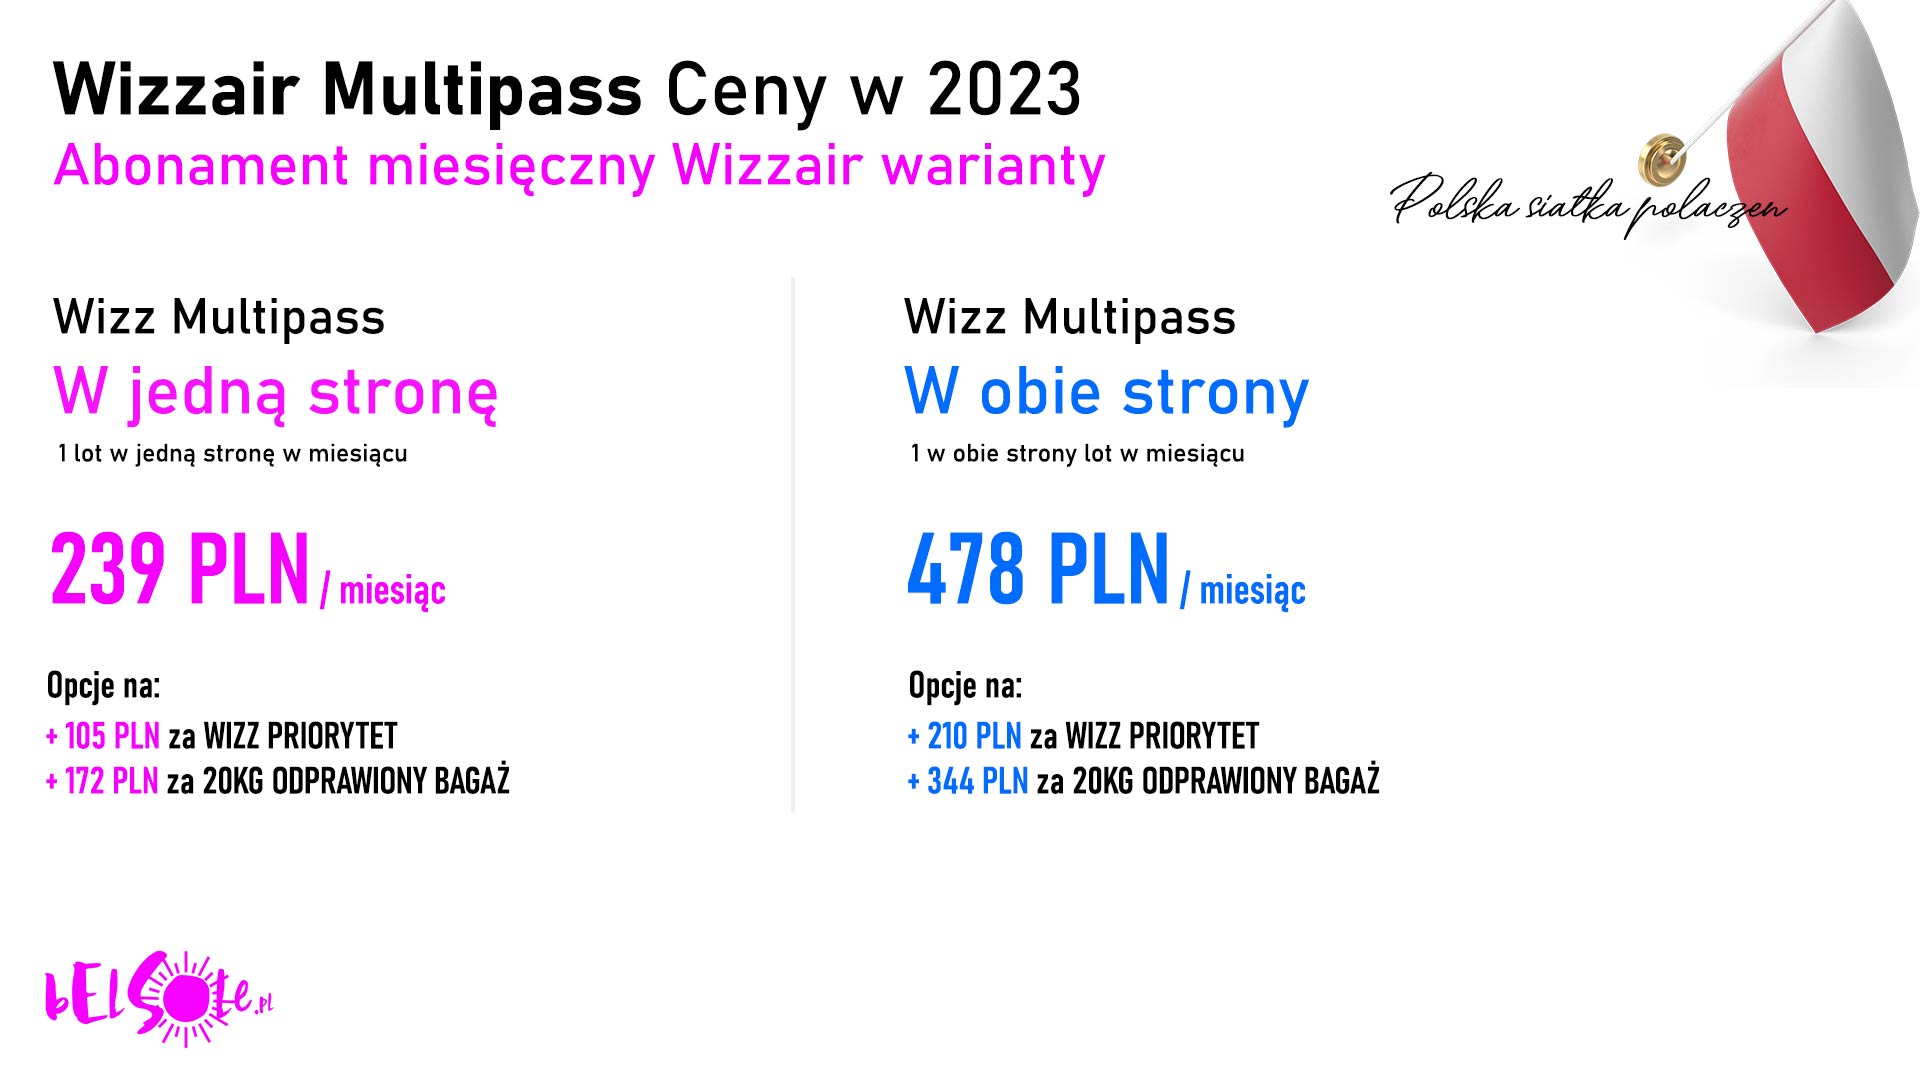 Wizzair Multipass Ceny